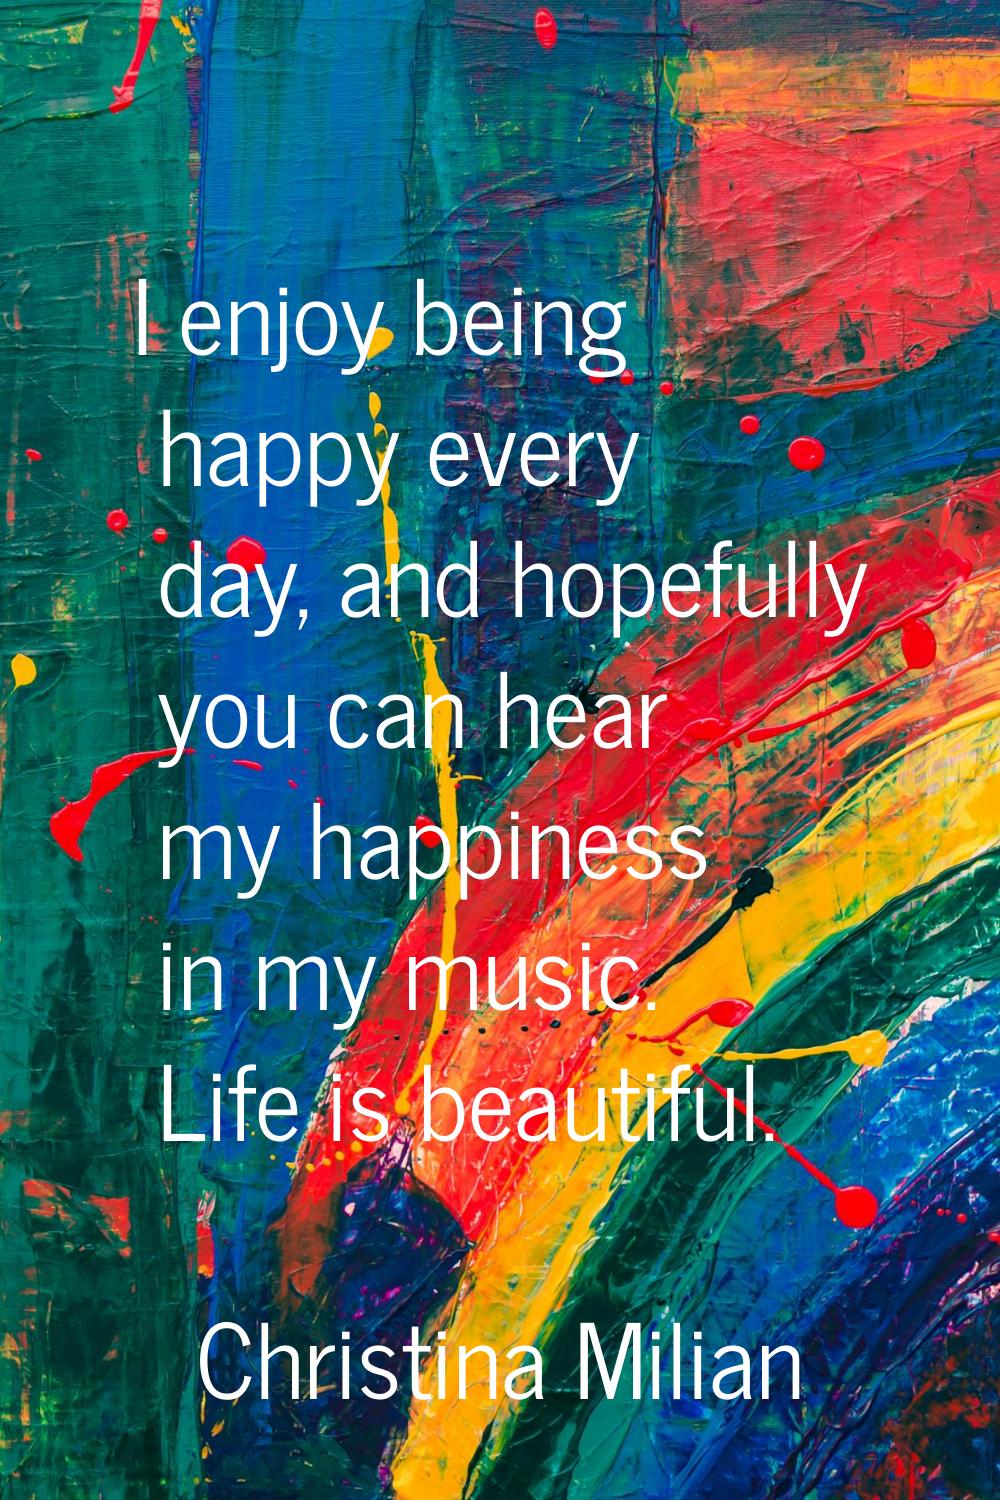 I enjoy being happy every day, and hopefully you can hear my happiness in my music. Life is beautif